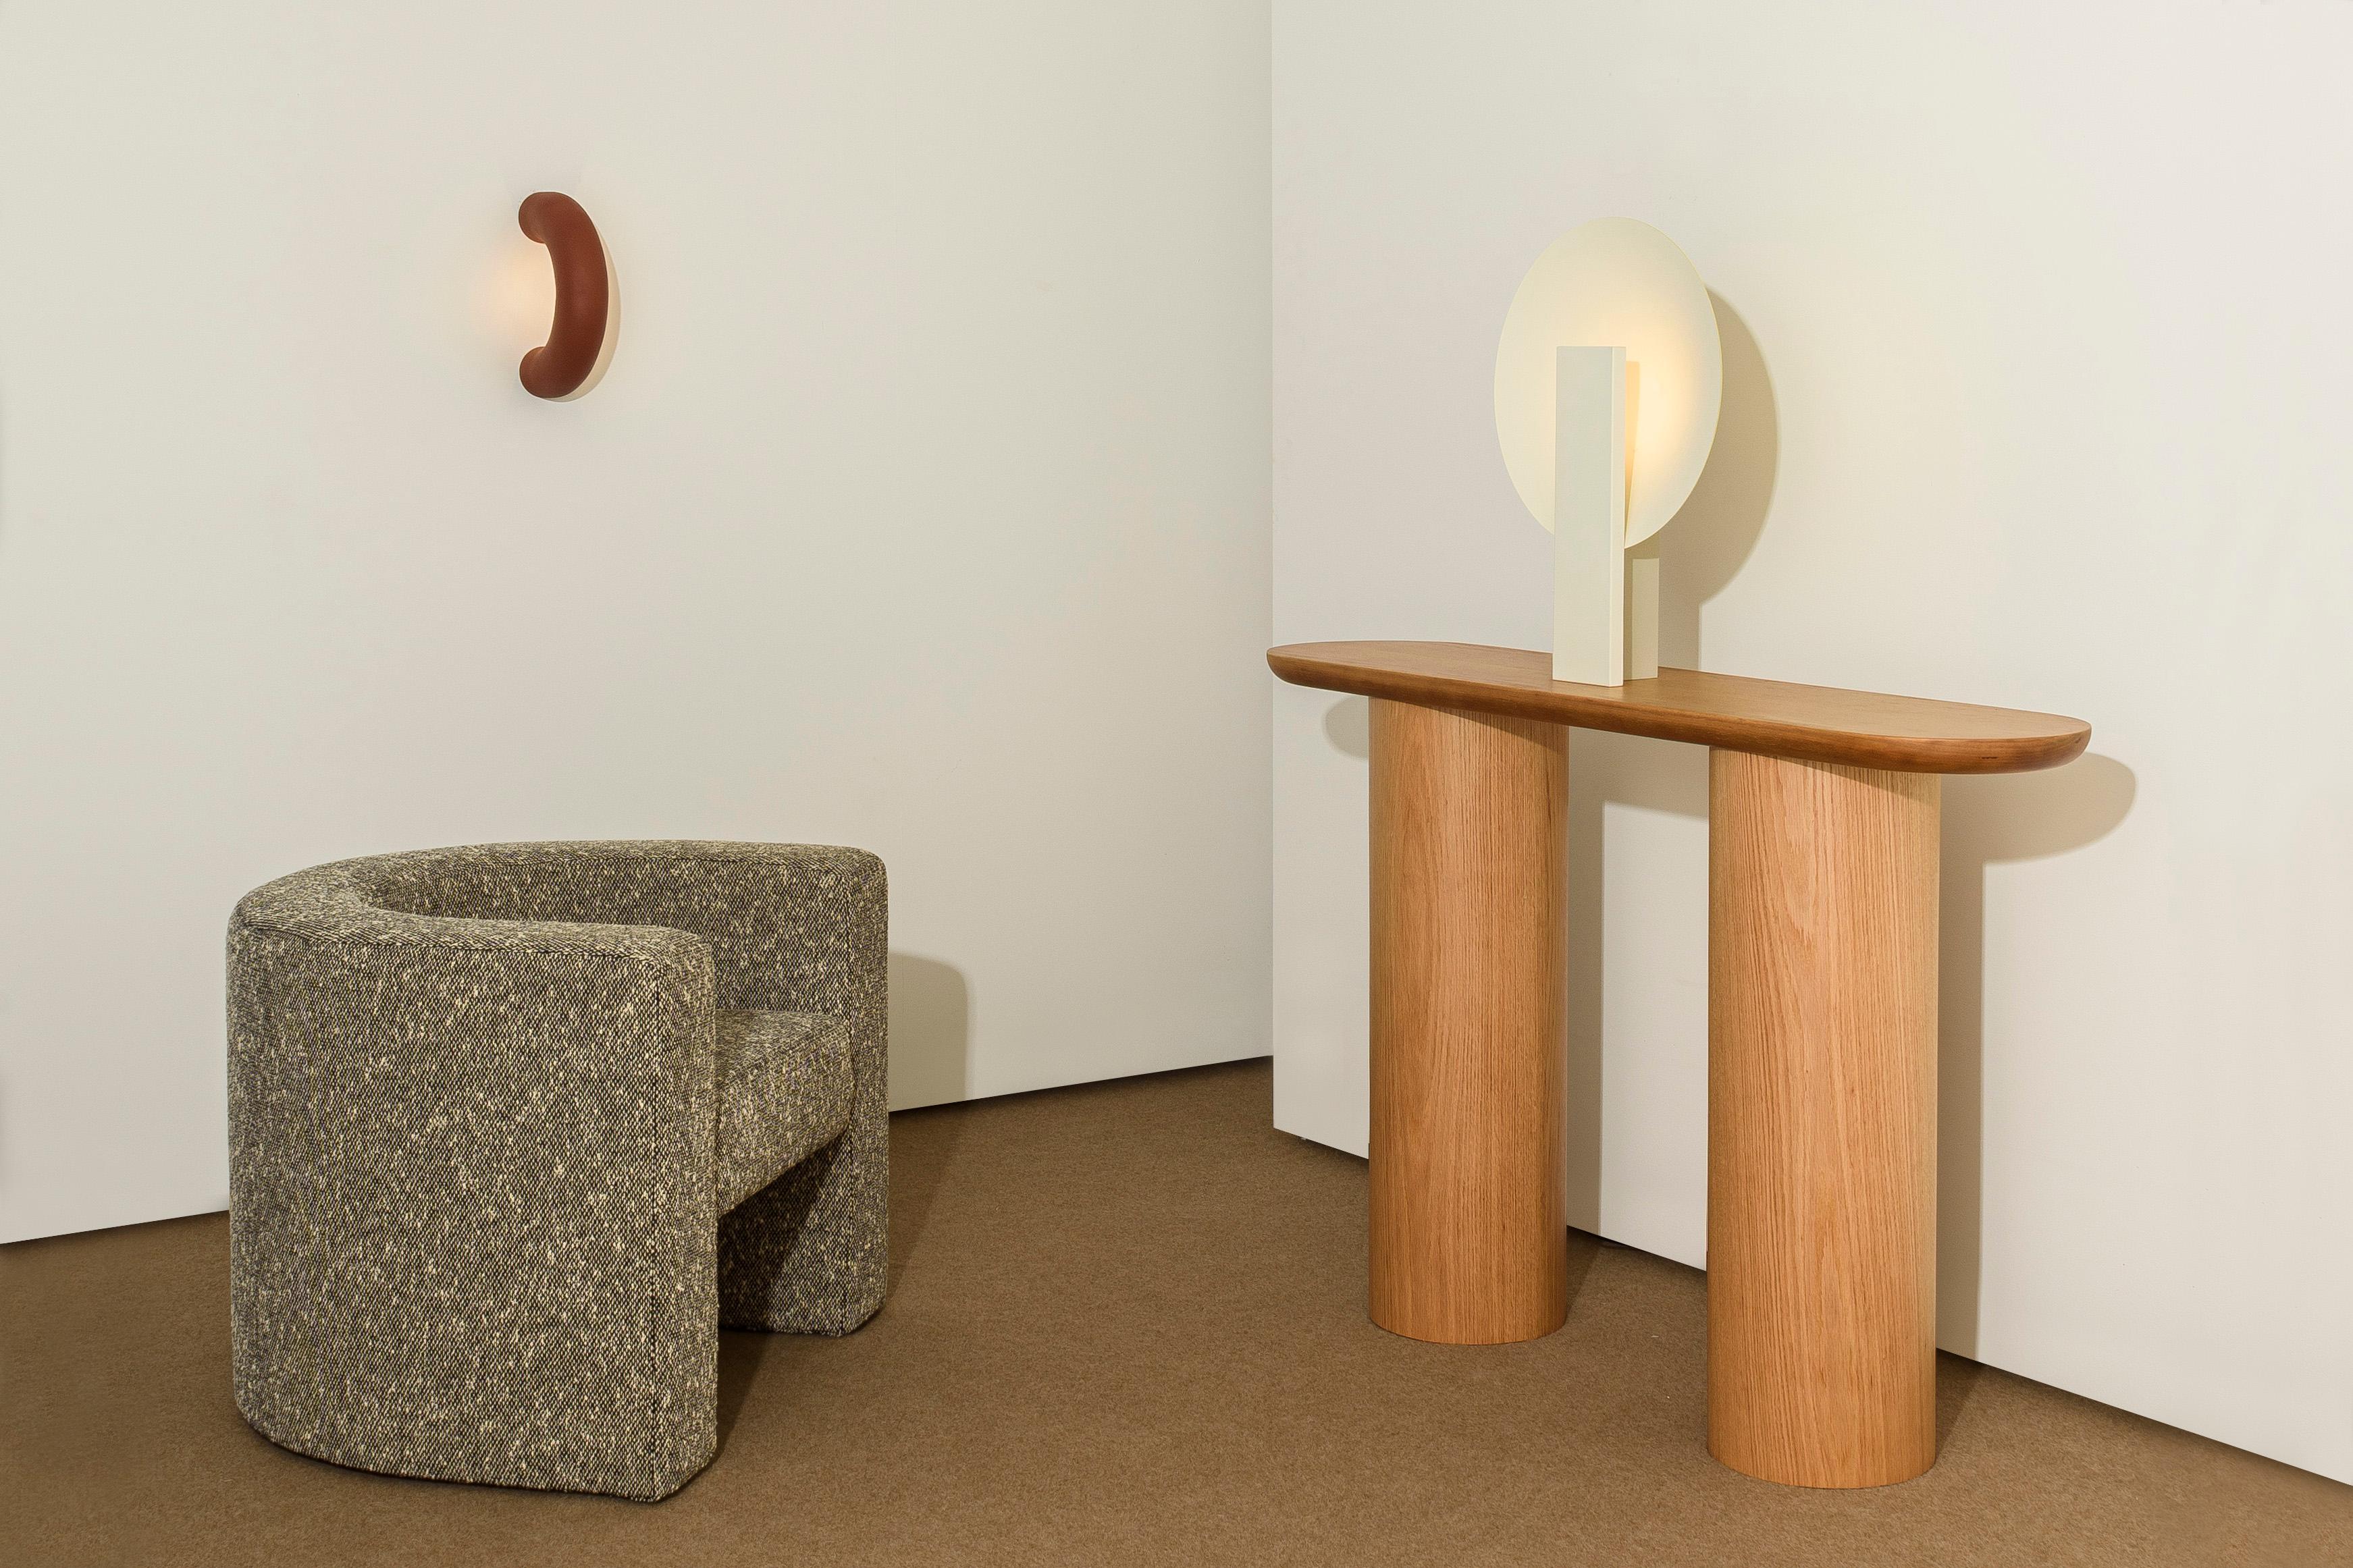 Arco Lamp, Terracotta, by Rain, Contemporary Wall Lamp, Stainless Steel In New Condition For Sale In Sao Paulo, SP